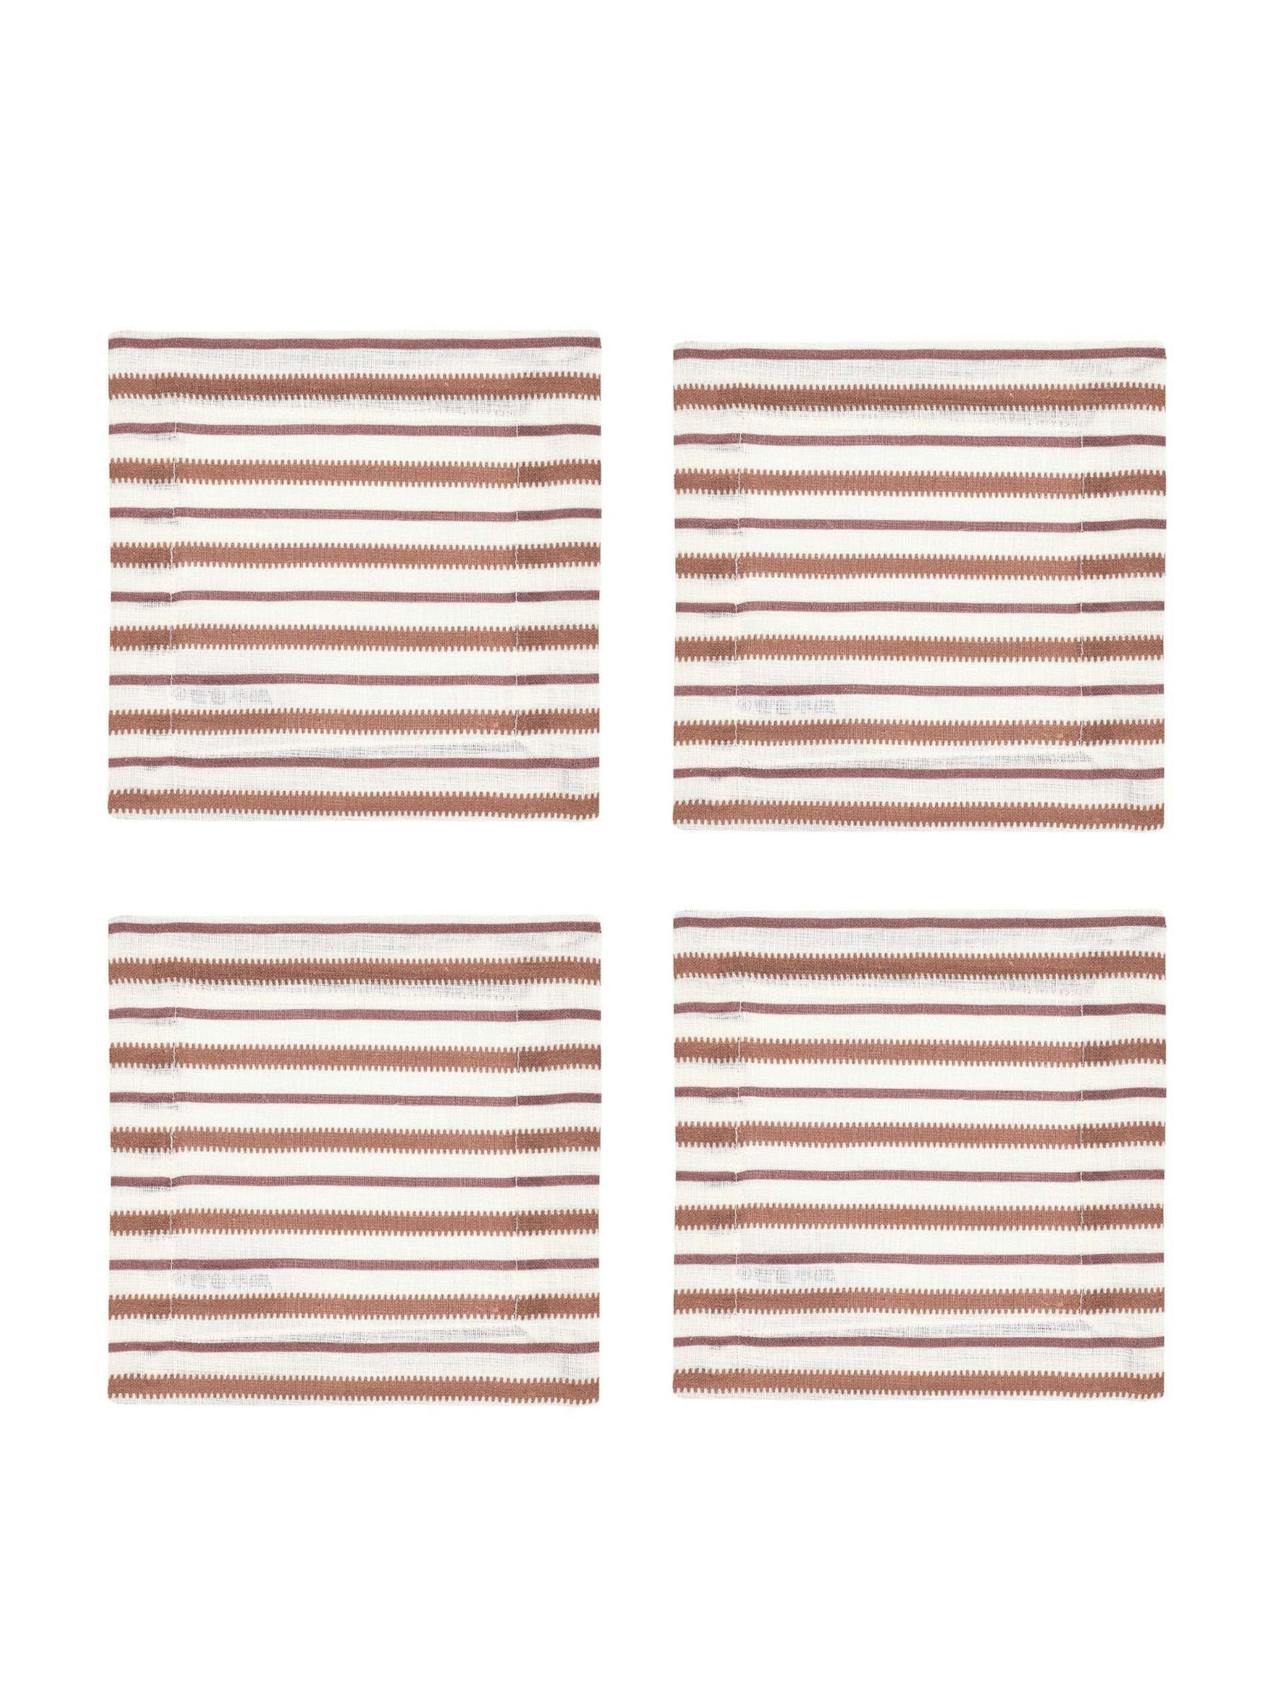 Victoria striped linen coasters in dusty rosewood, set of 4